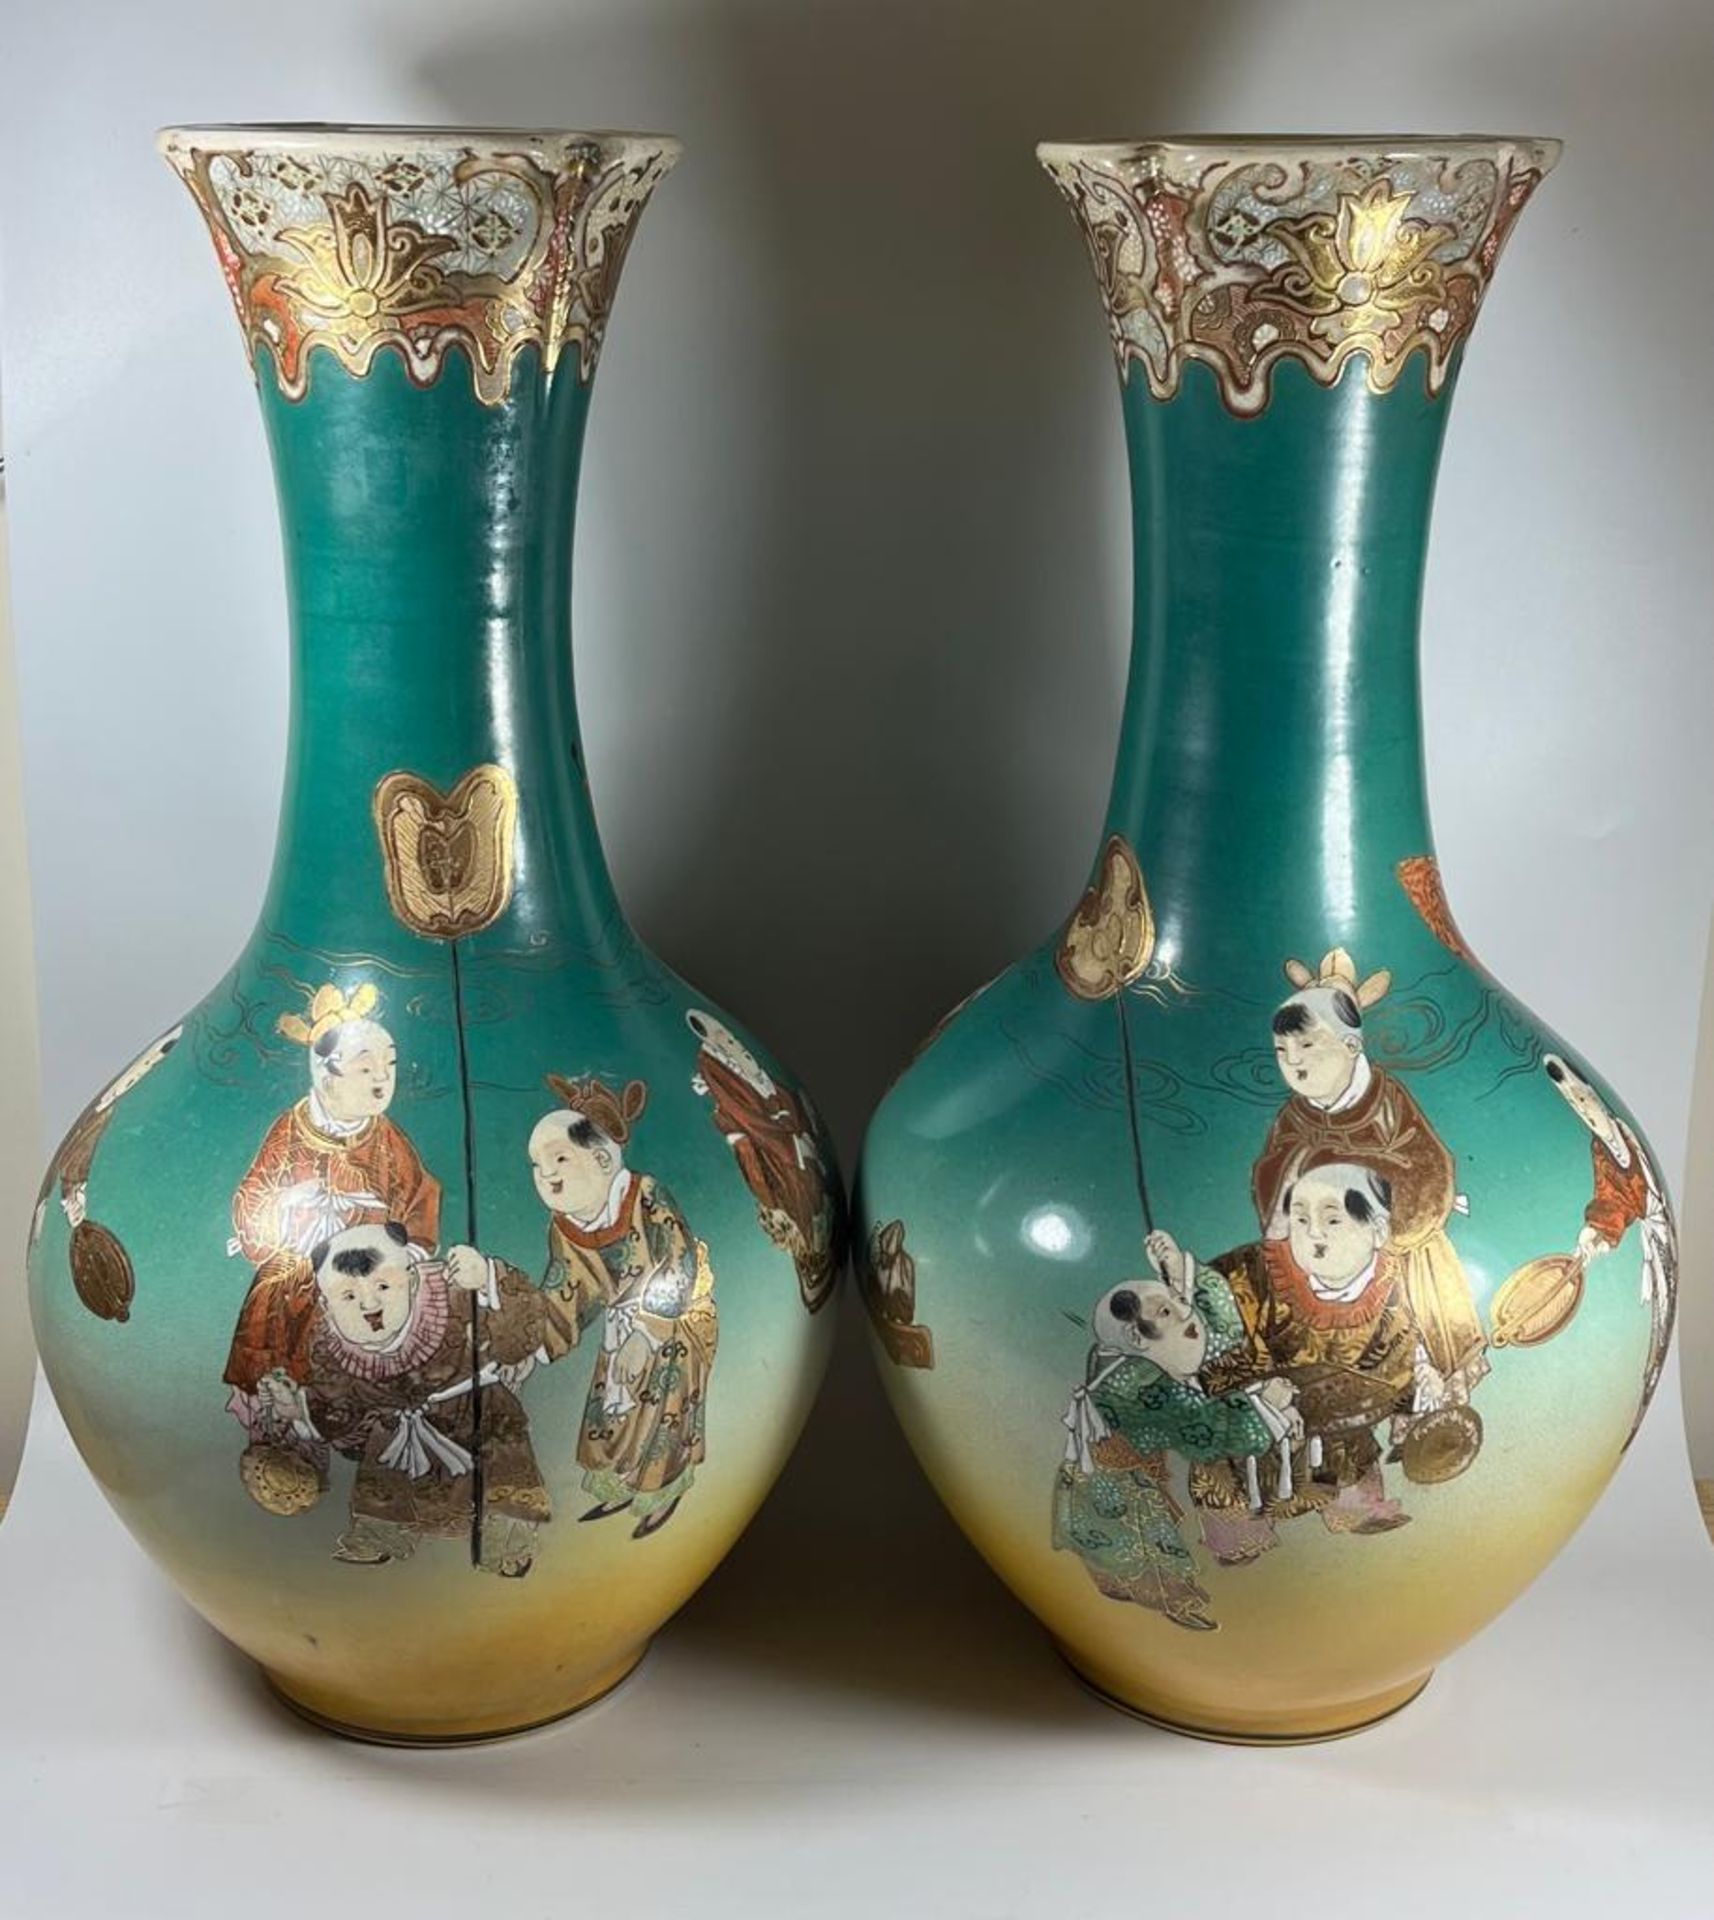 A HUGE PAIR OF JAPANESE MEIJI PERIOD (1868-1912) SATSUMA VASES WITH FIGURES DESIGN, HEIGHT 49CM